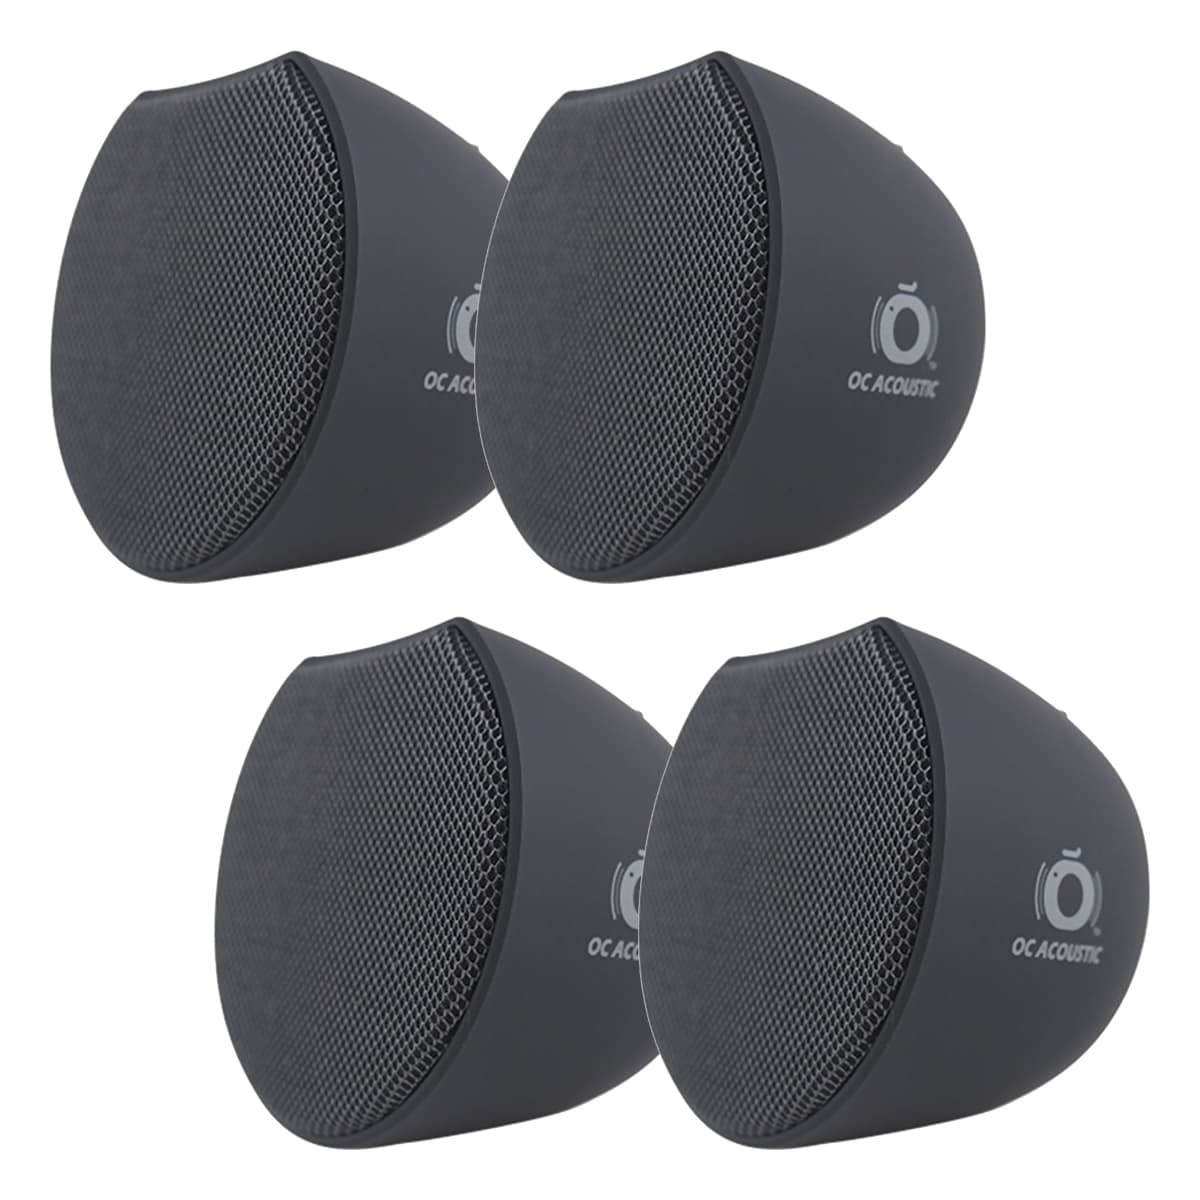 OC Acoustic Newport Plug-in Outlet Speaker with Bluetooth 5.1 and Built-in USB Type-A Charging Port - Set of 4 (Charcoal/Black)